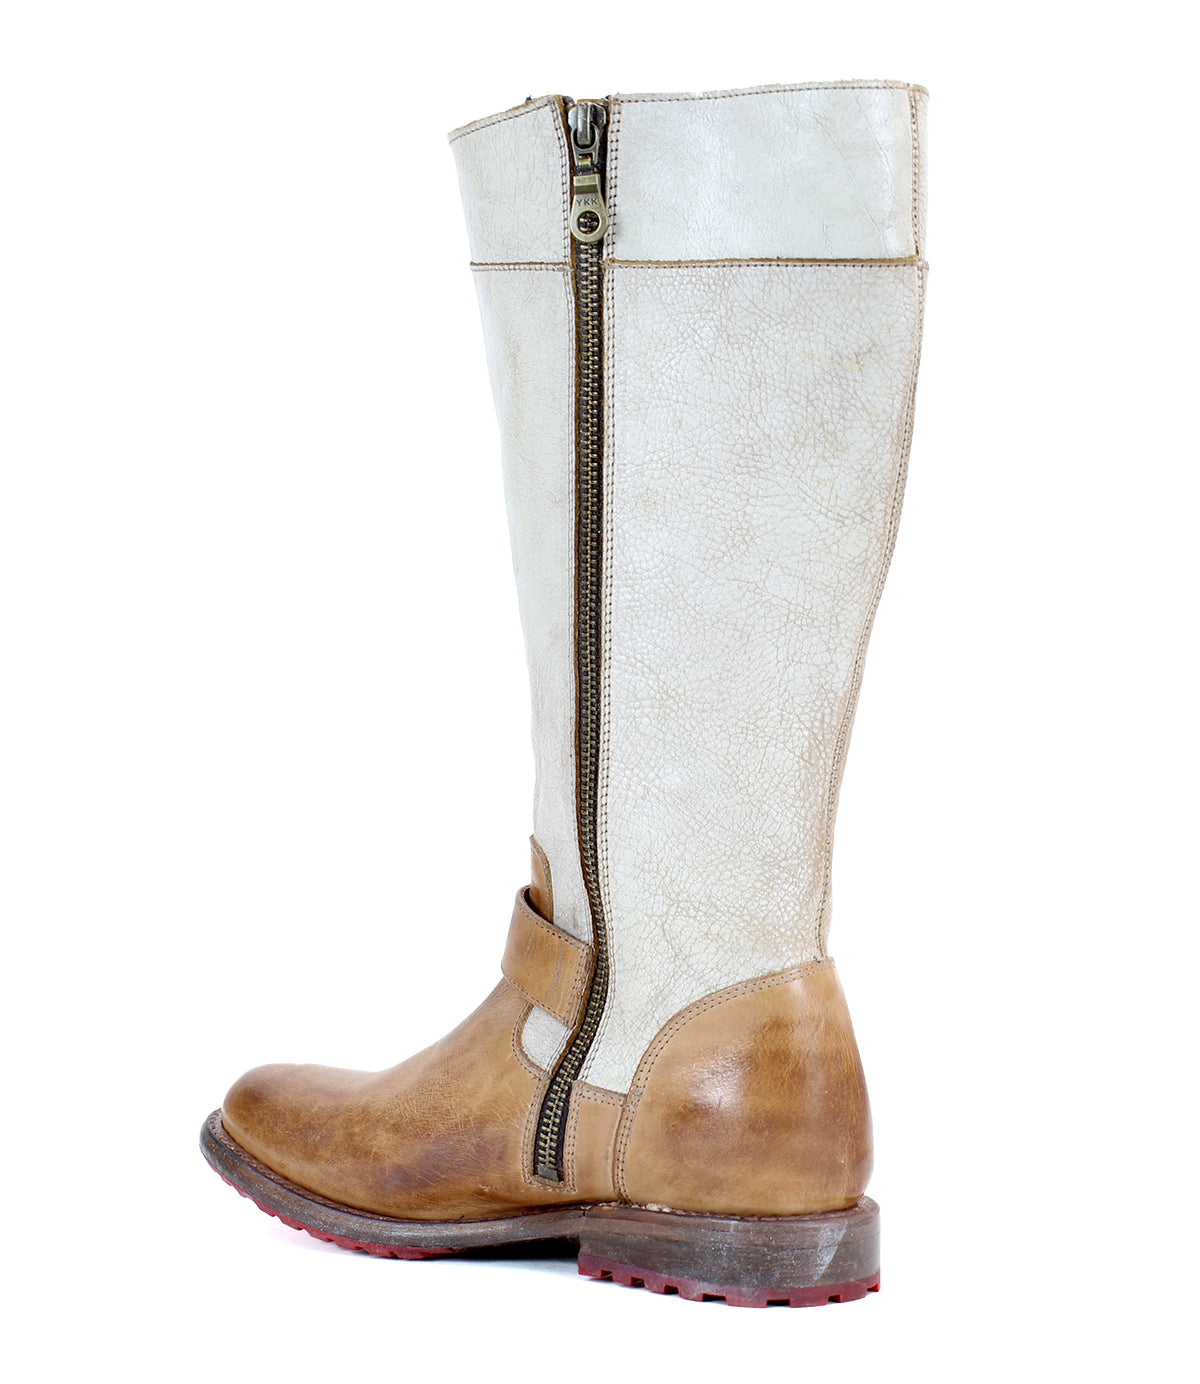 Tall brown and beige mid-calf leather boot with dual zippers and buckles, a flat heel, and a red-tinted sole, viewed from the front-left side. Bed Stu Gogo Lug.